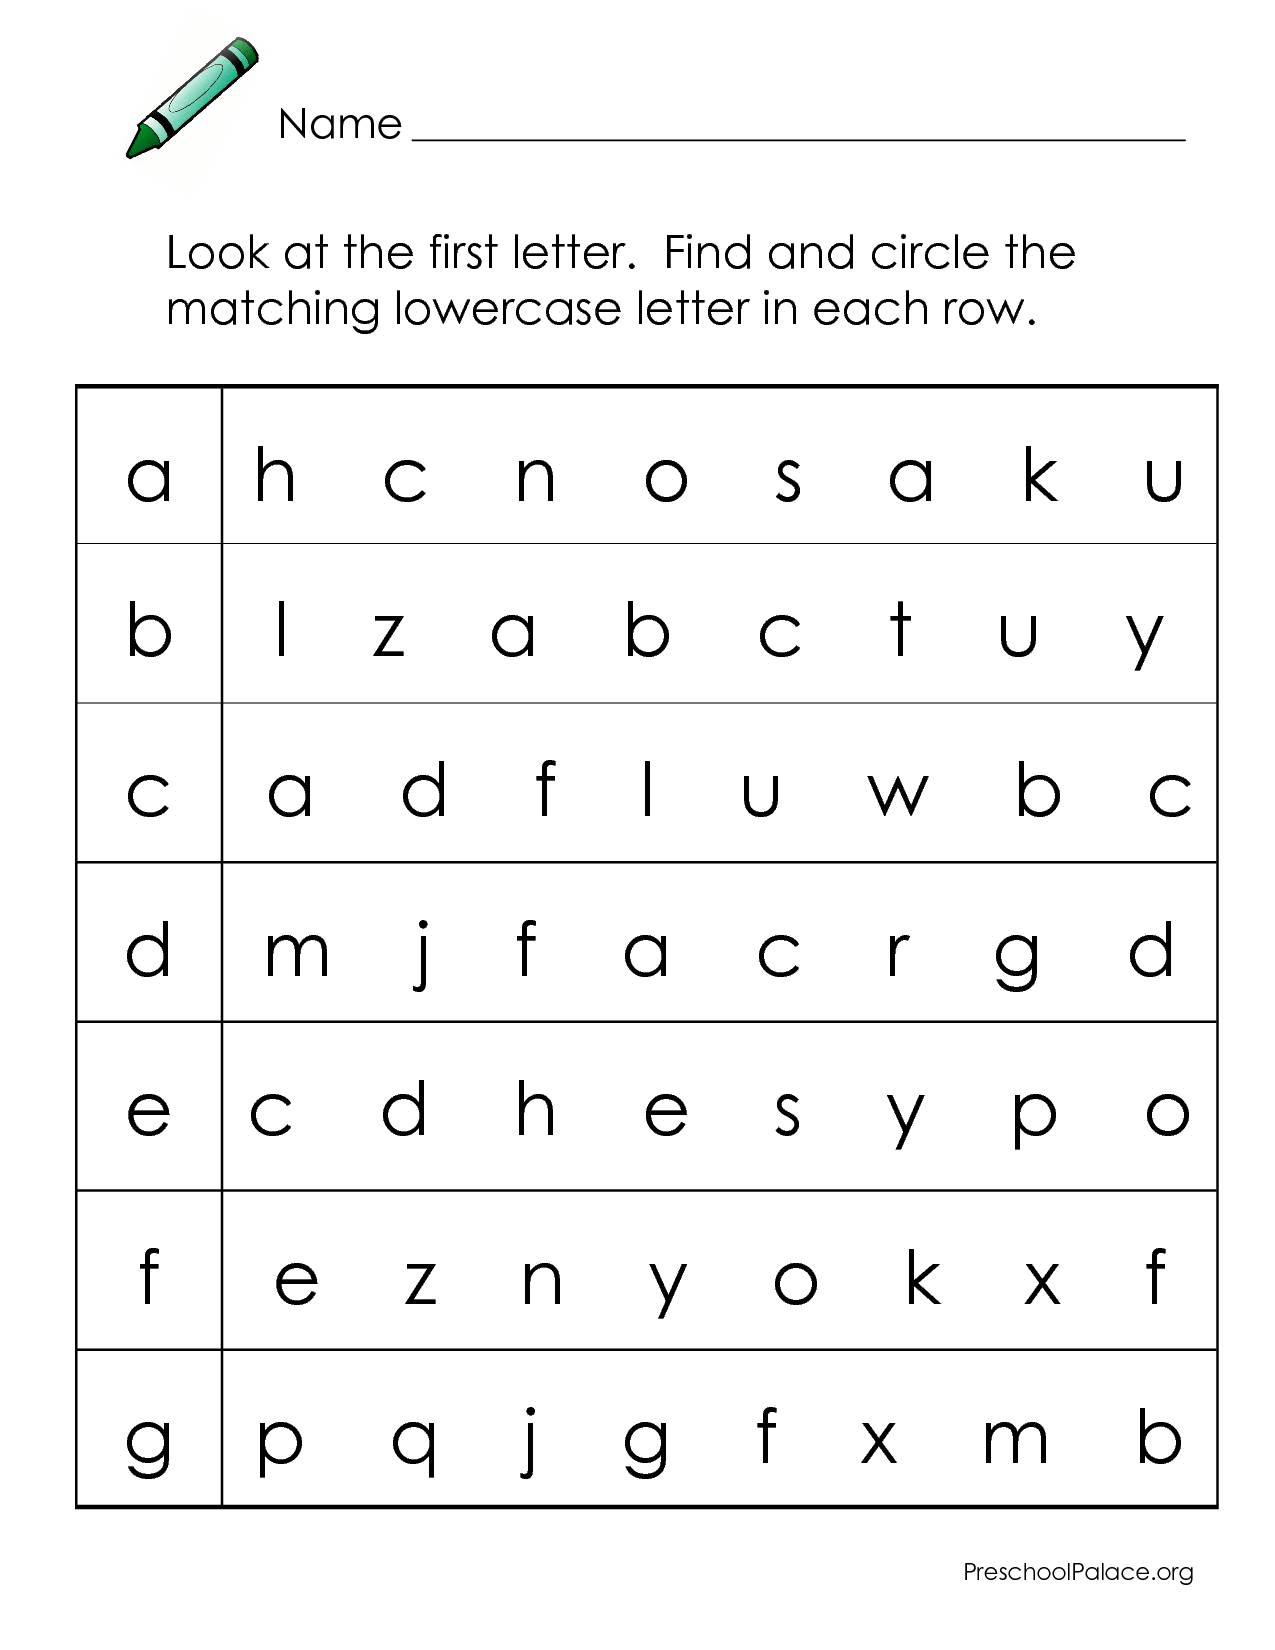 Abcs - Letter Matching A-G Lowercase | Letter Recognition